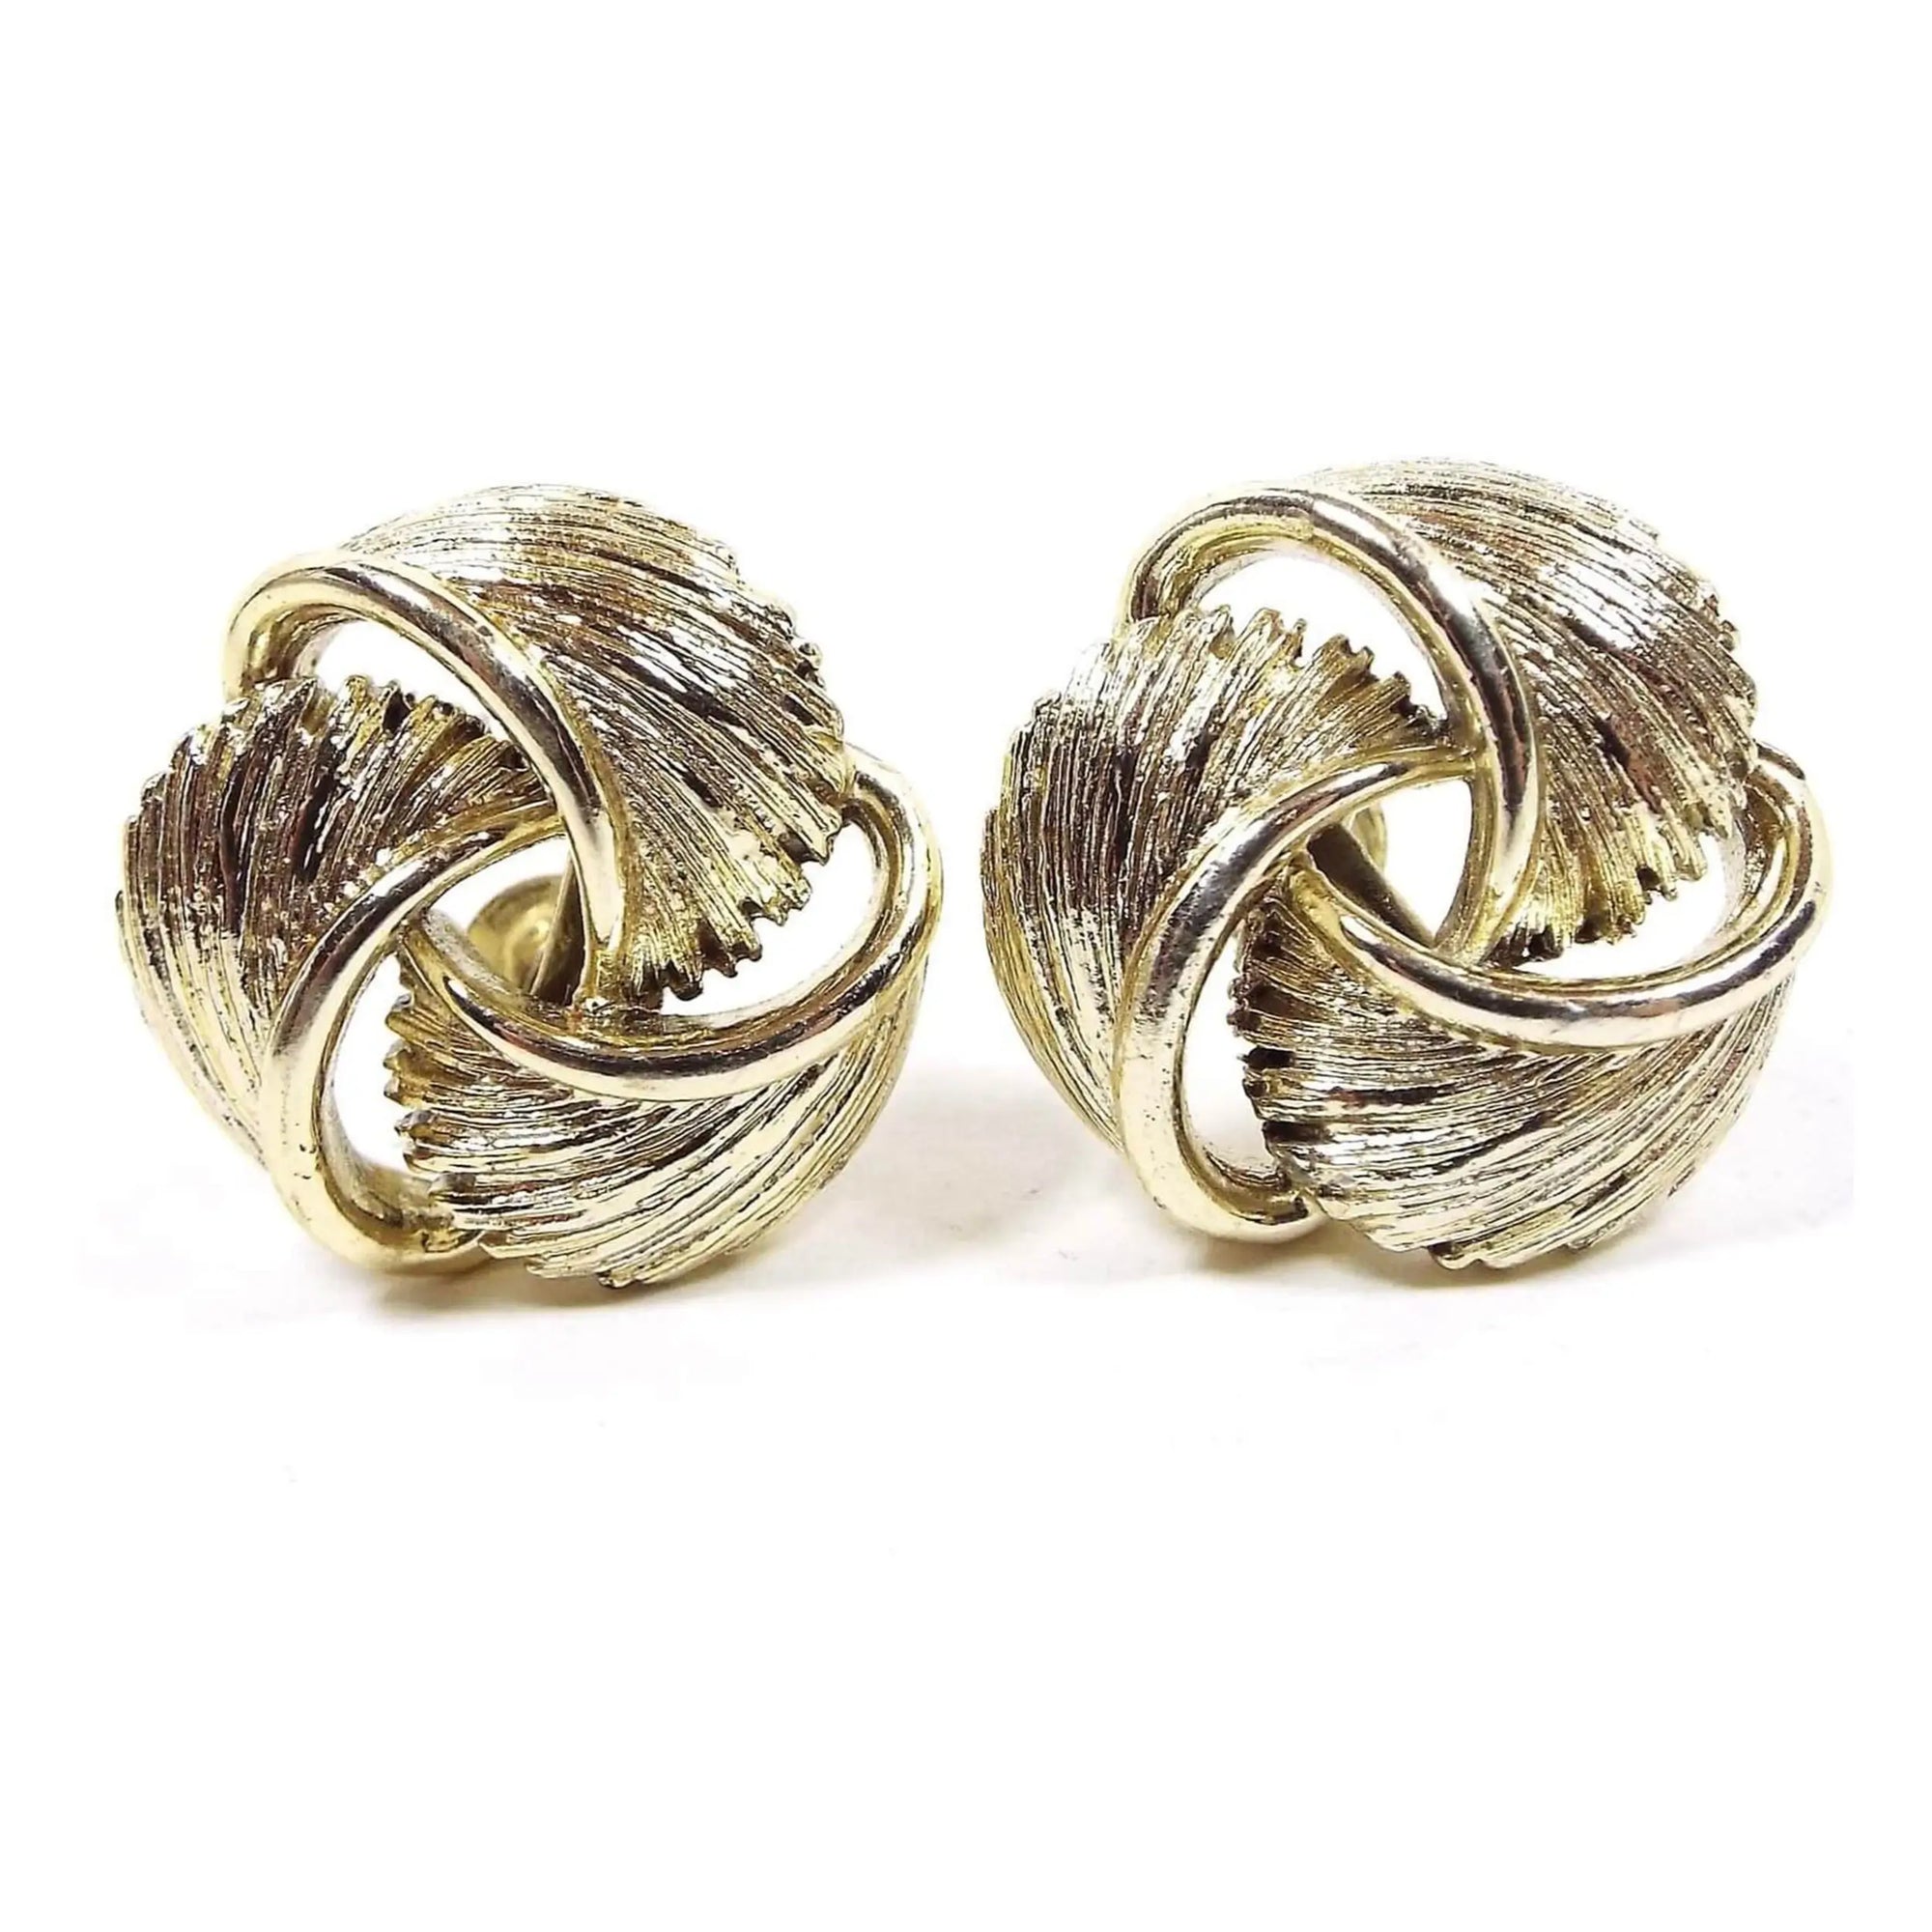 Front view of the Mid Century vintage Lisner screw back earrings. They are gold tone in color and look like three feather like areas that are twisted and curved around in a round type shape.